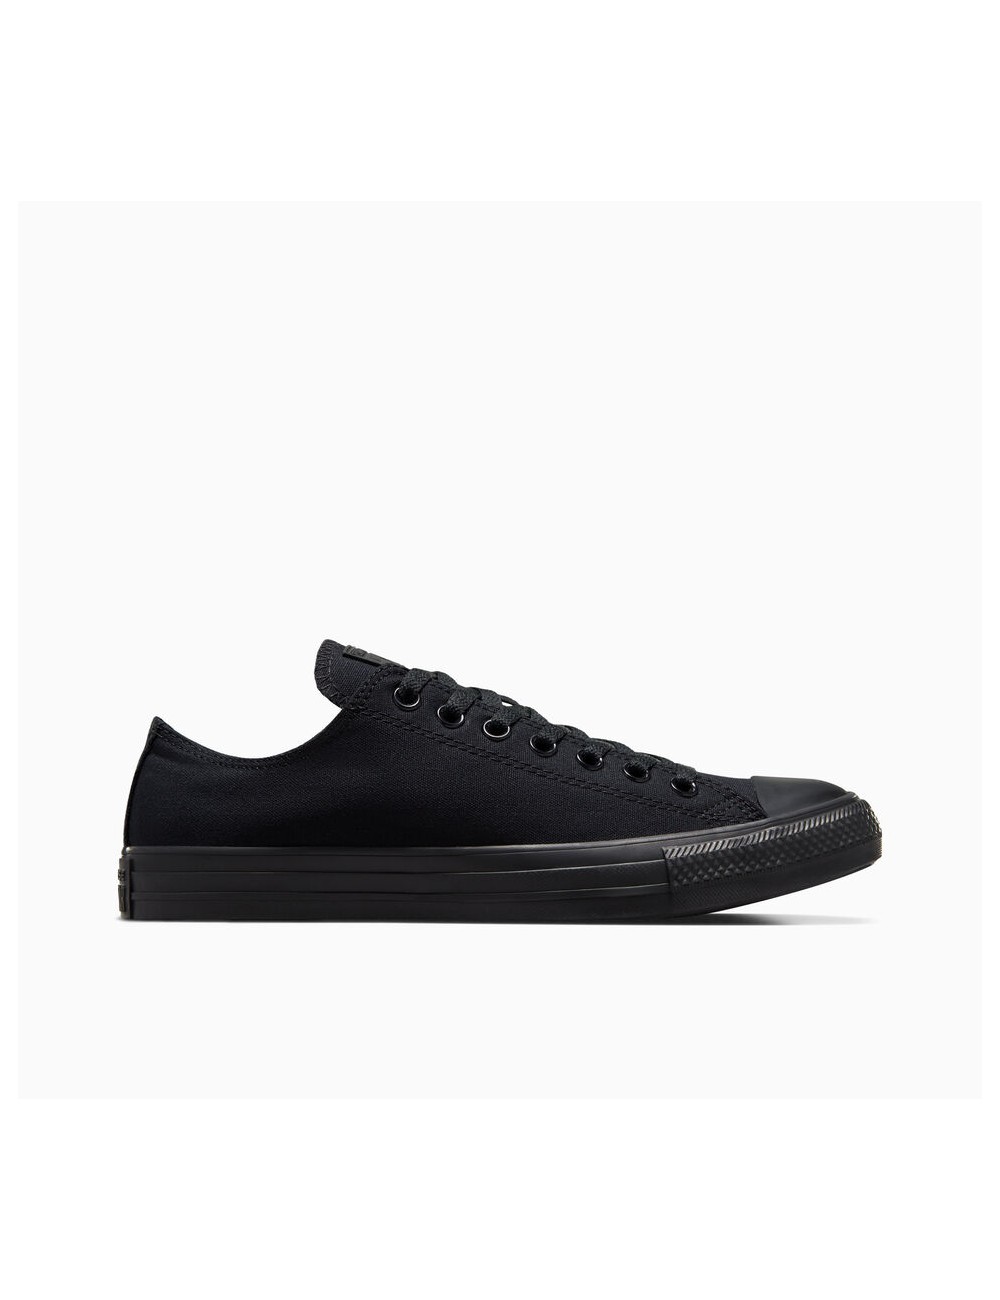 SNEAKERS CONVERSE CHUCK TAYLOR ALL STAR CLASSIC NEGRO/NEGRO